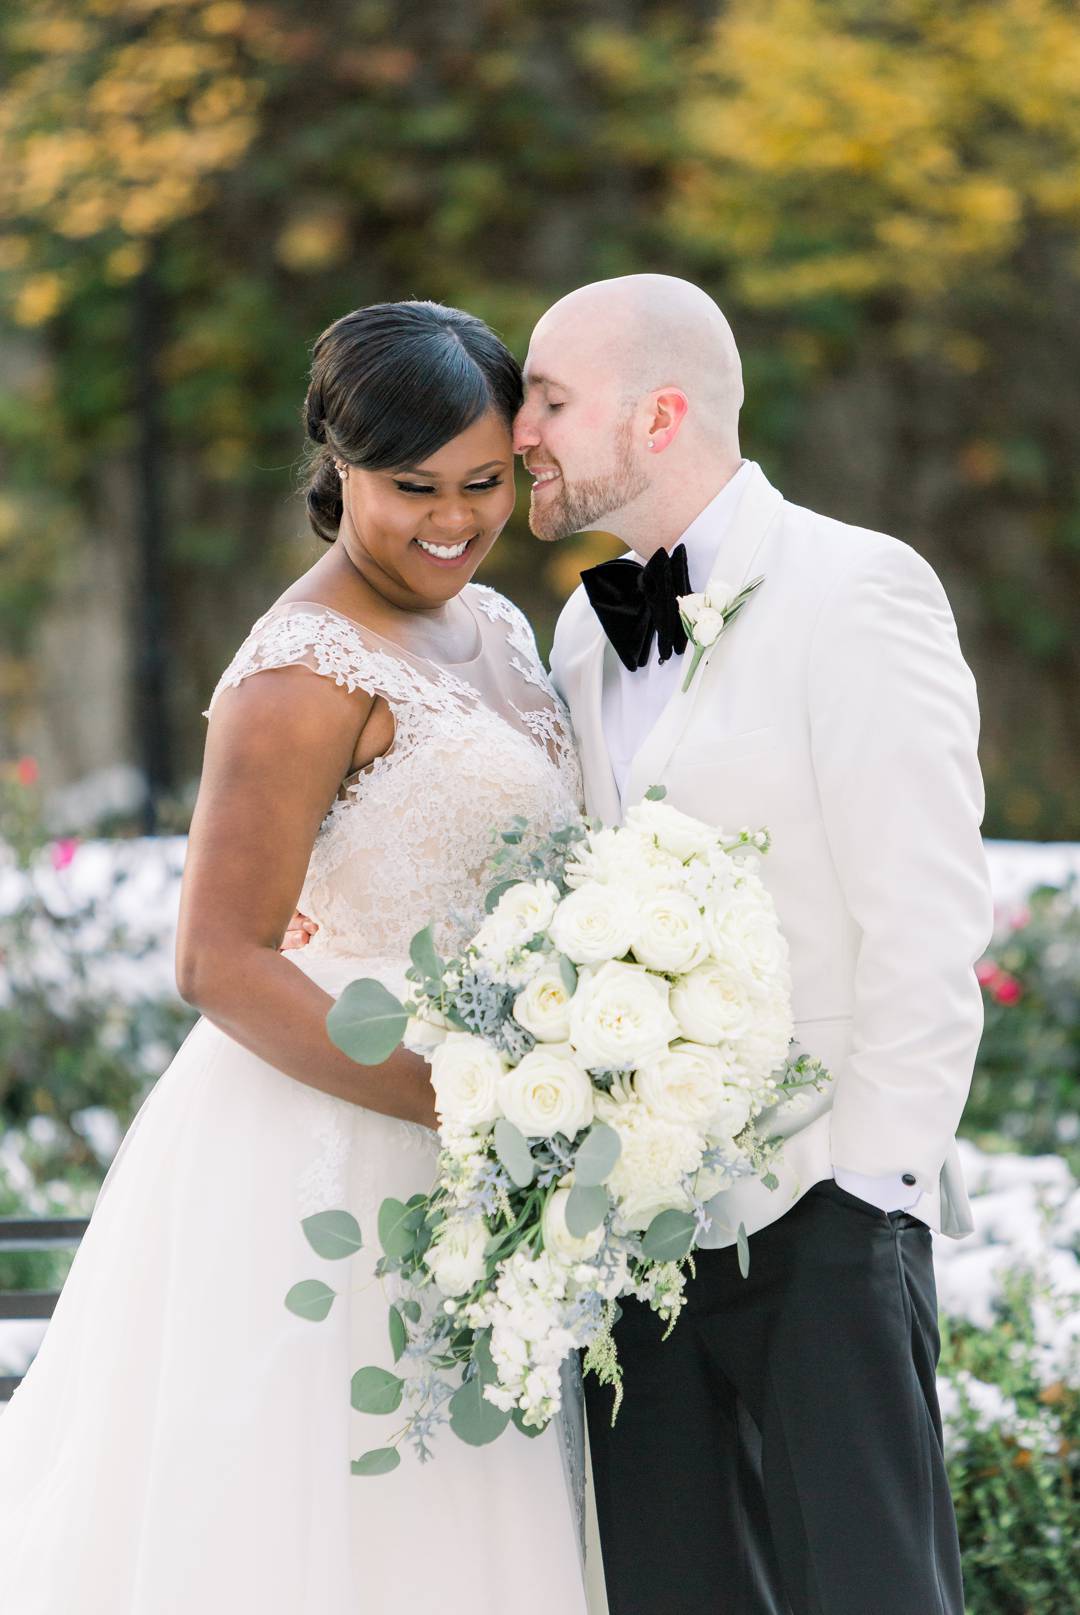 Snowy White Wedding. A Winter Wonderland Wedding at the Biltmore Ballrooms in Atlanta, GA by Leigh Wolfe Photography